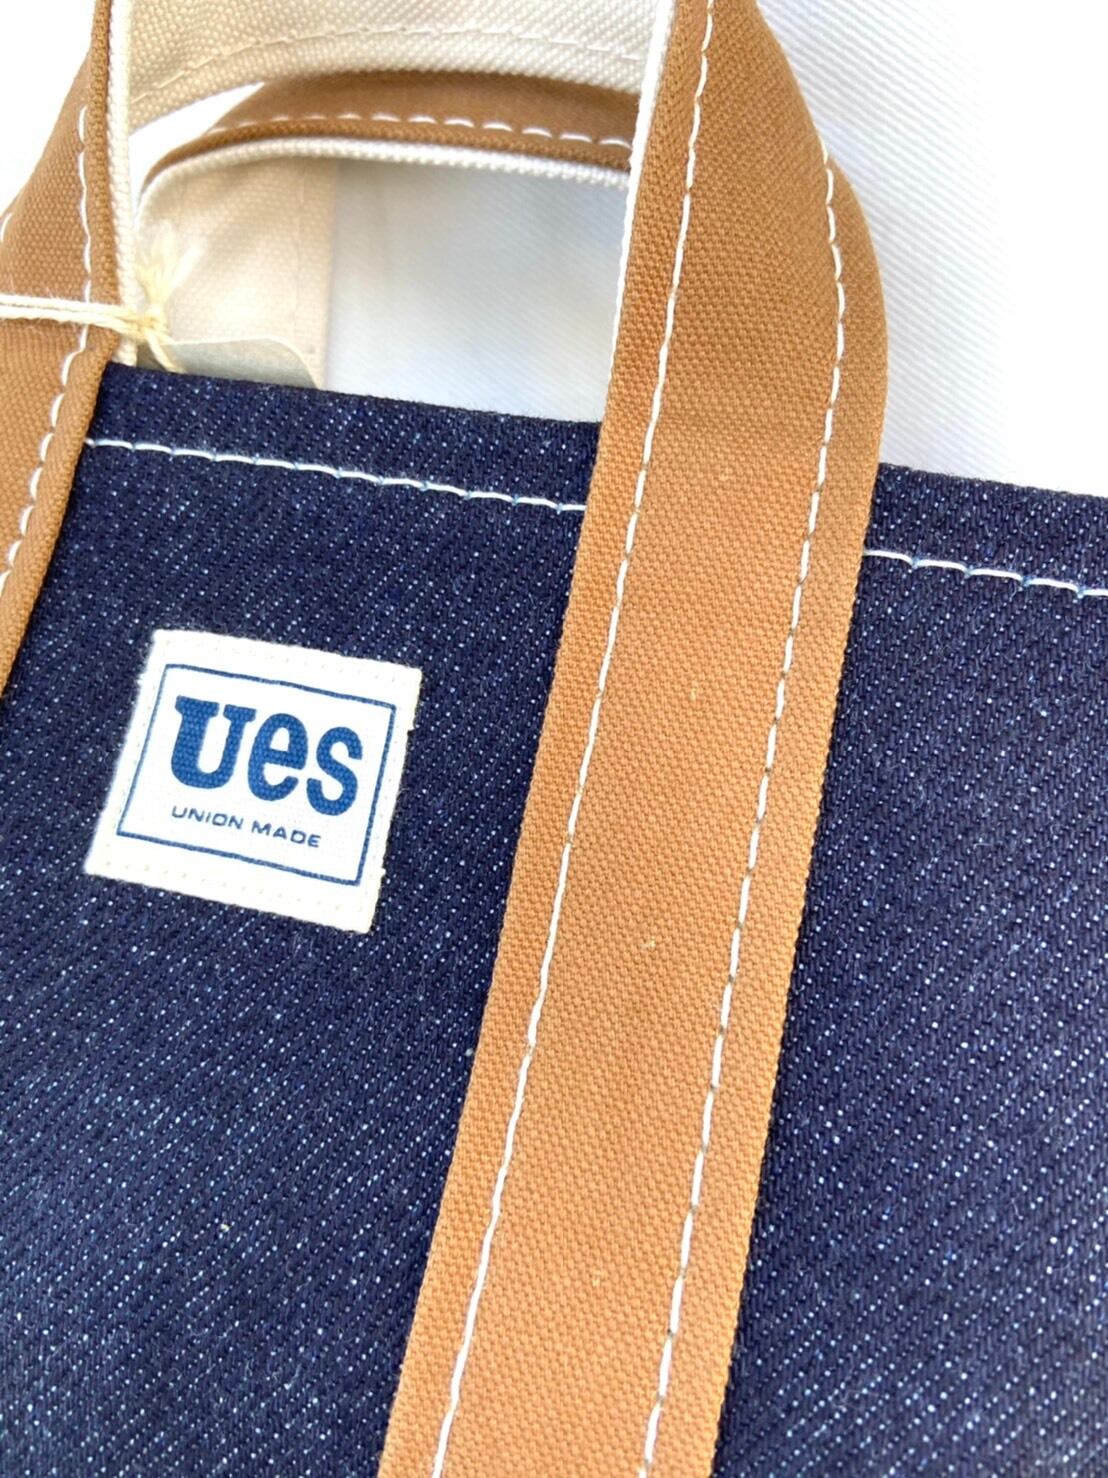 【UES】トートバッグ S | ONE WASH powered by BASE